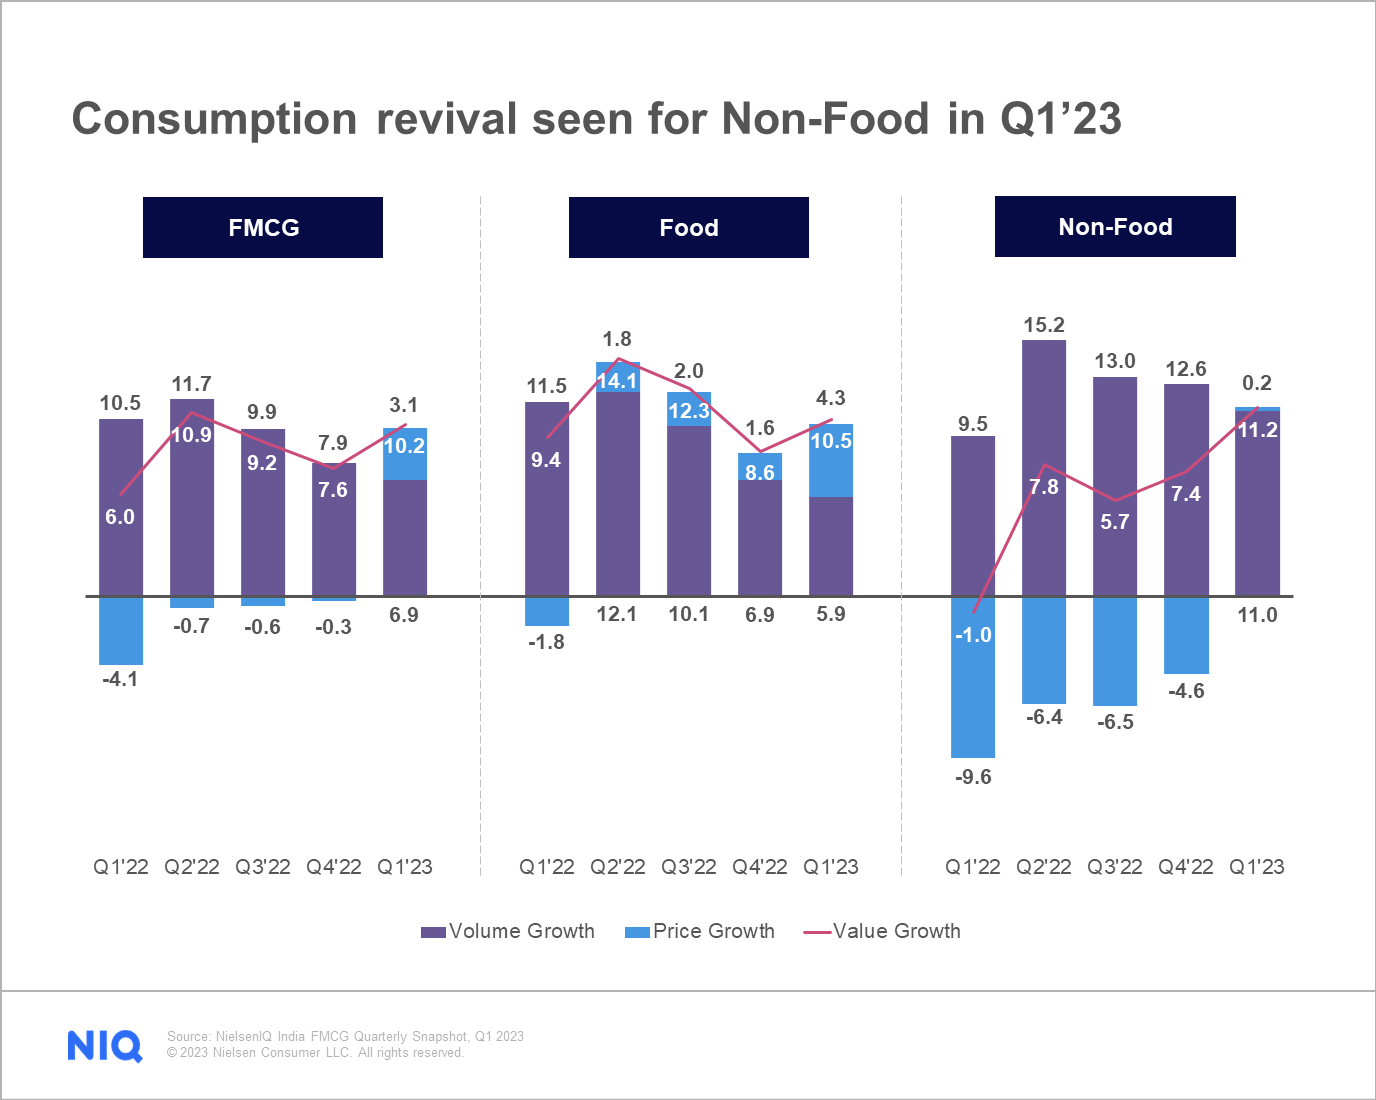 Consumption revival seen for Non-Food in Q1’23